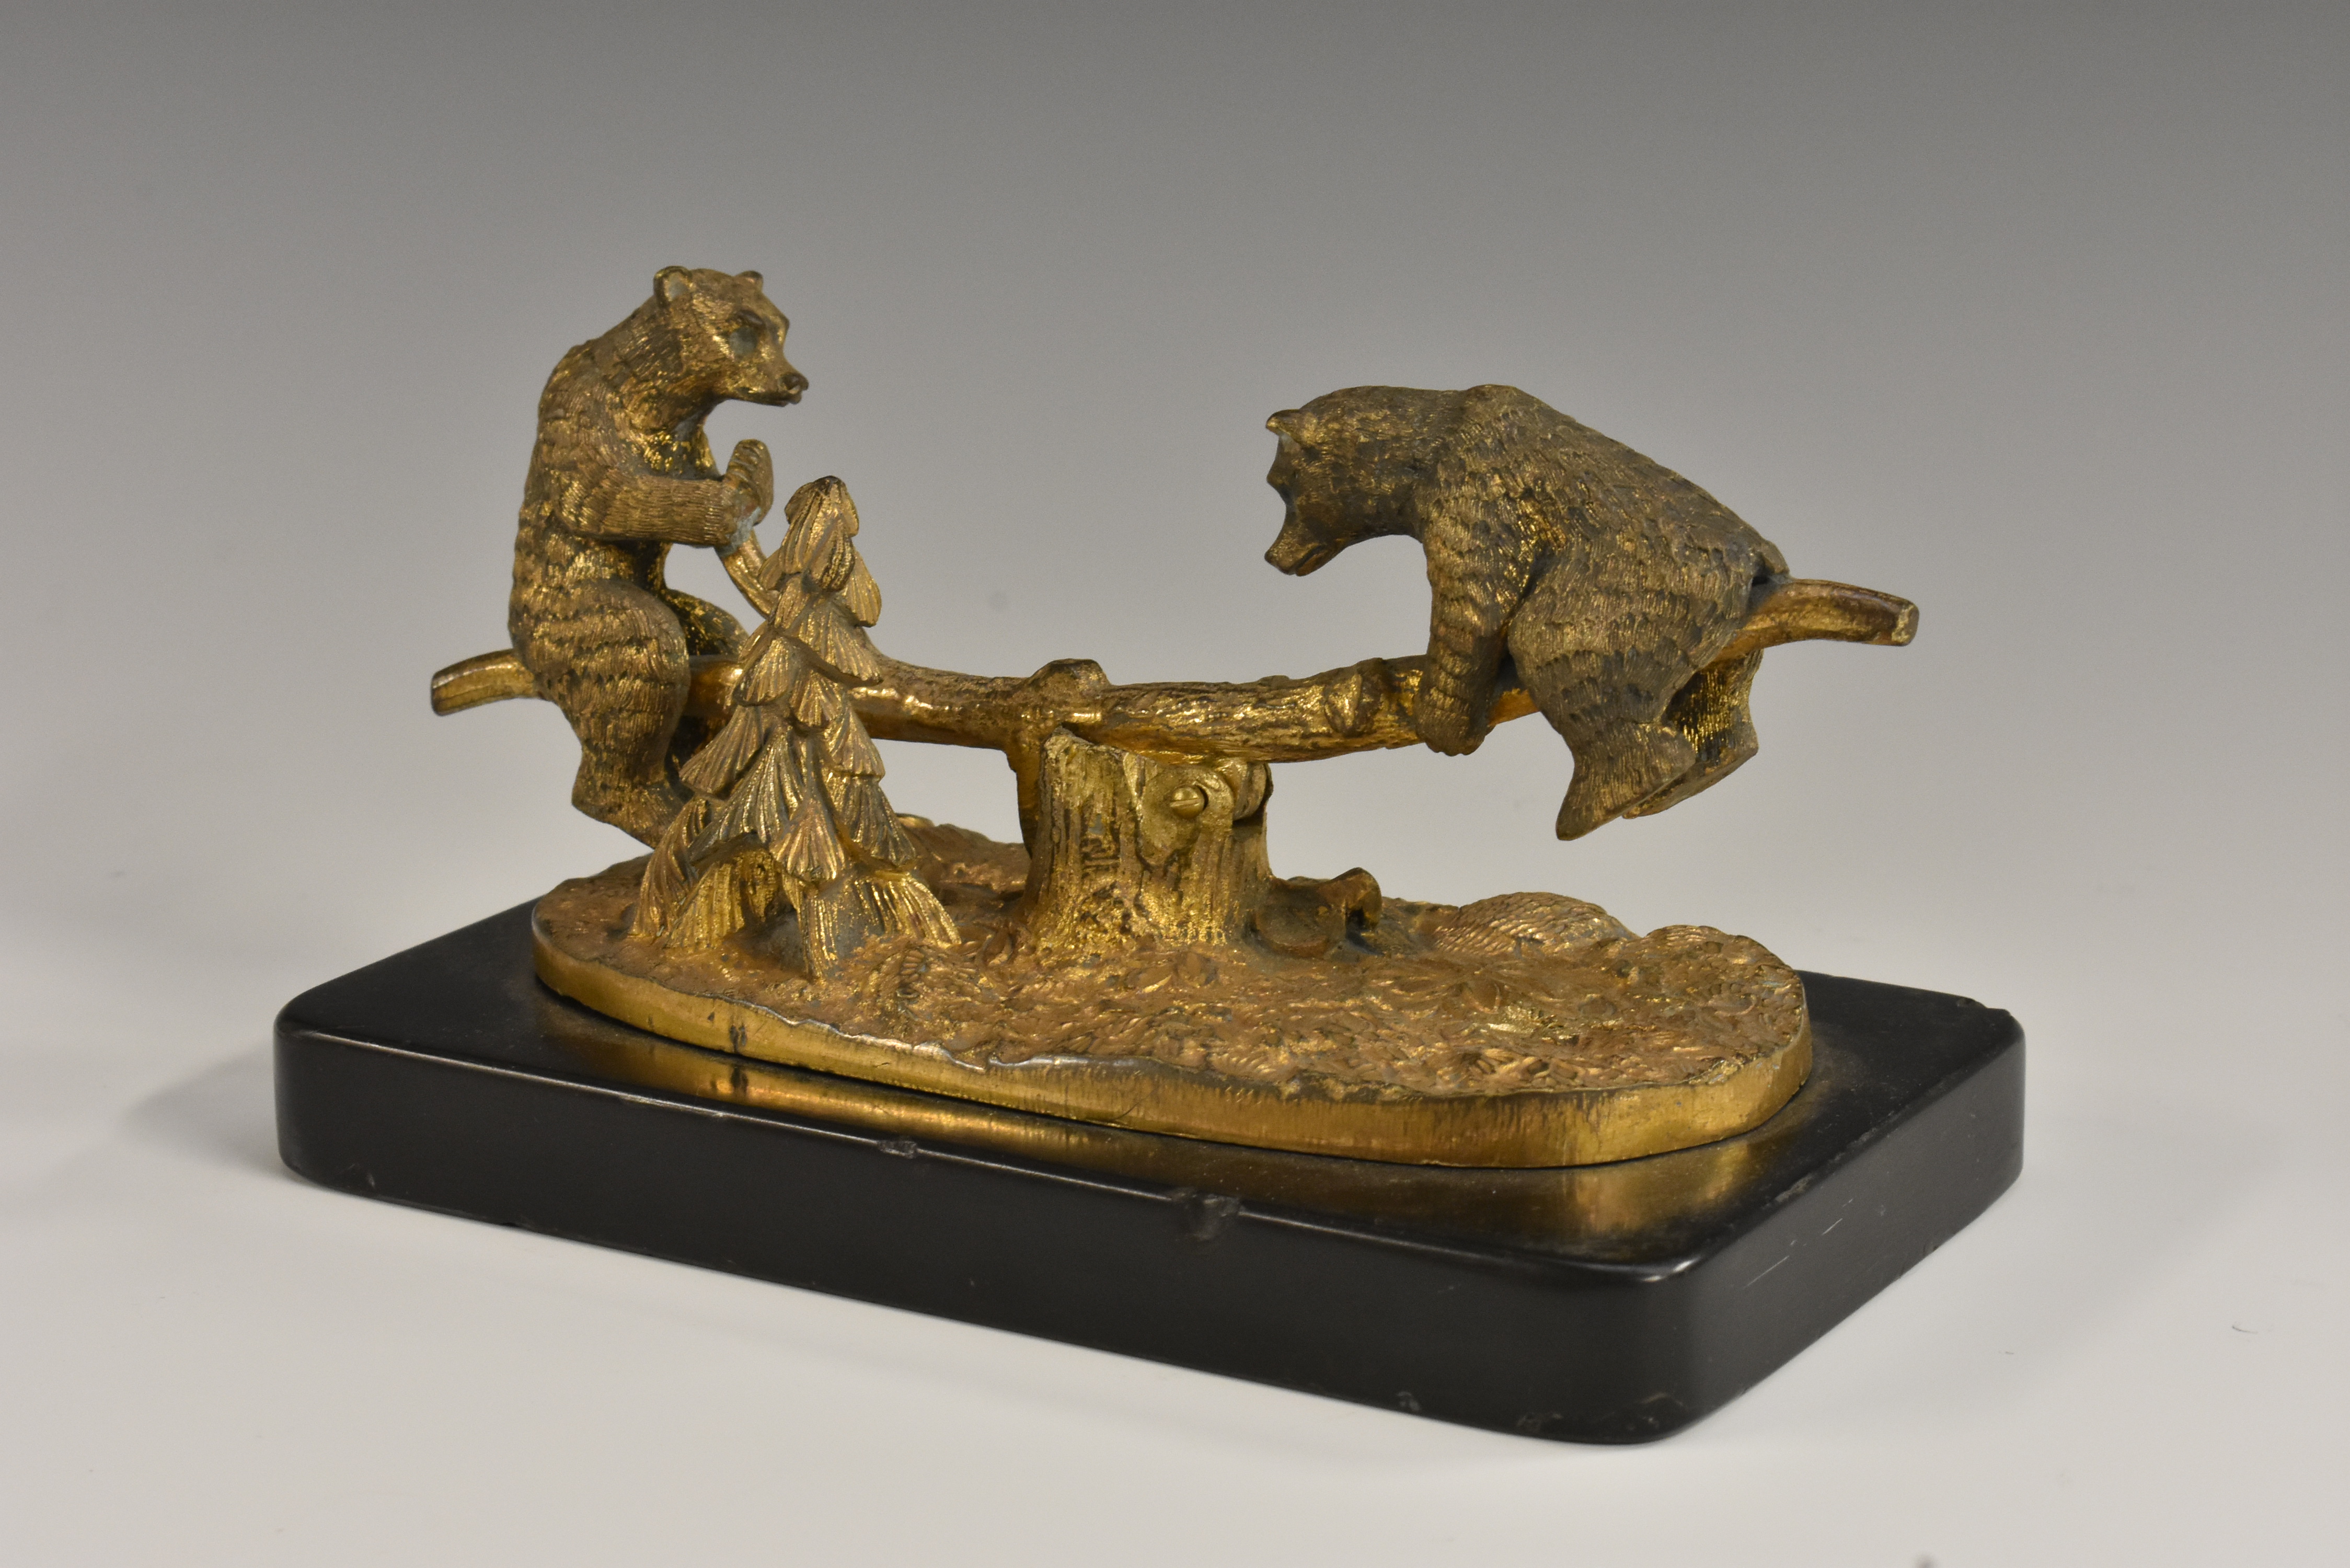 A 19th century gilt bronze novelty, cast as two bears on a seesaw, in the Black Forest,